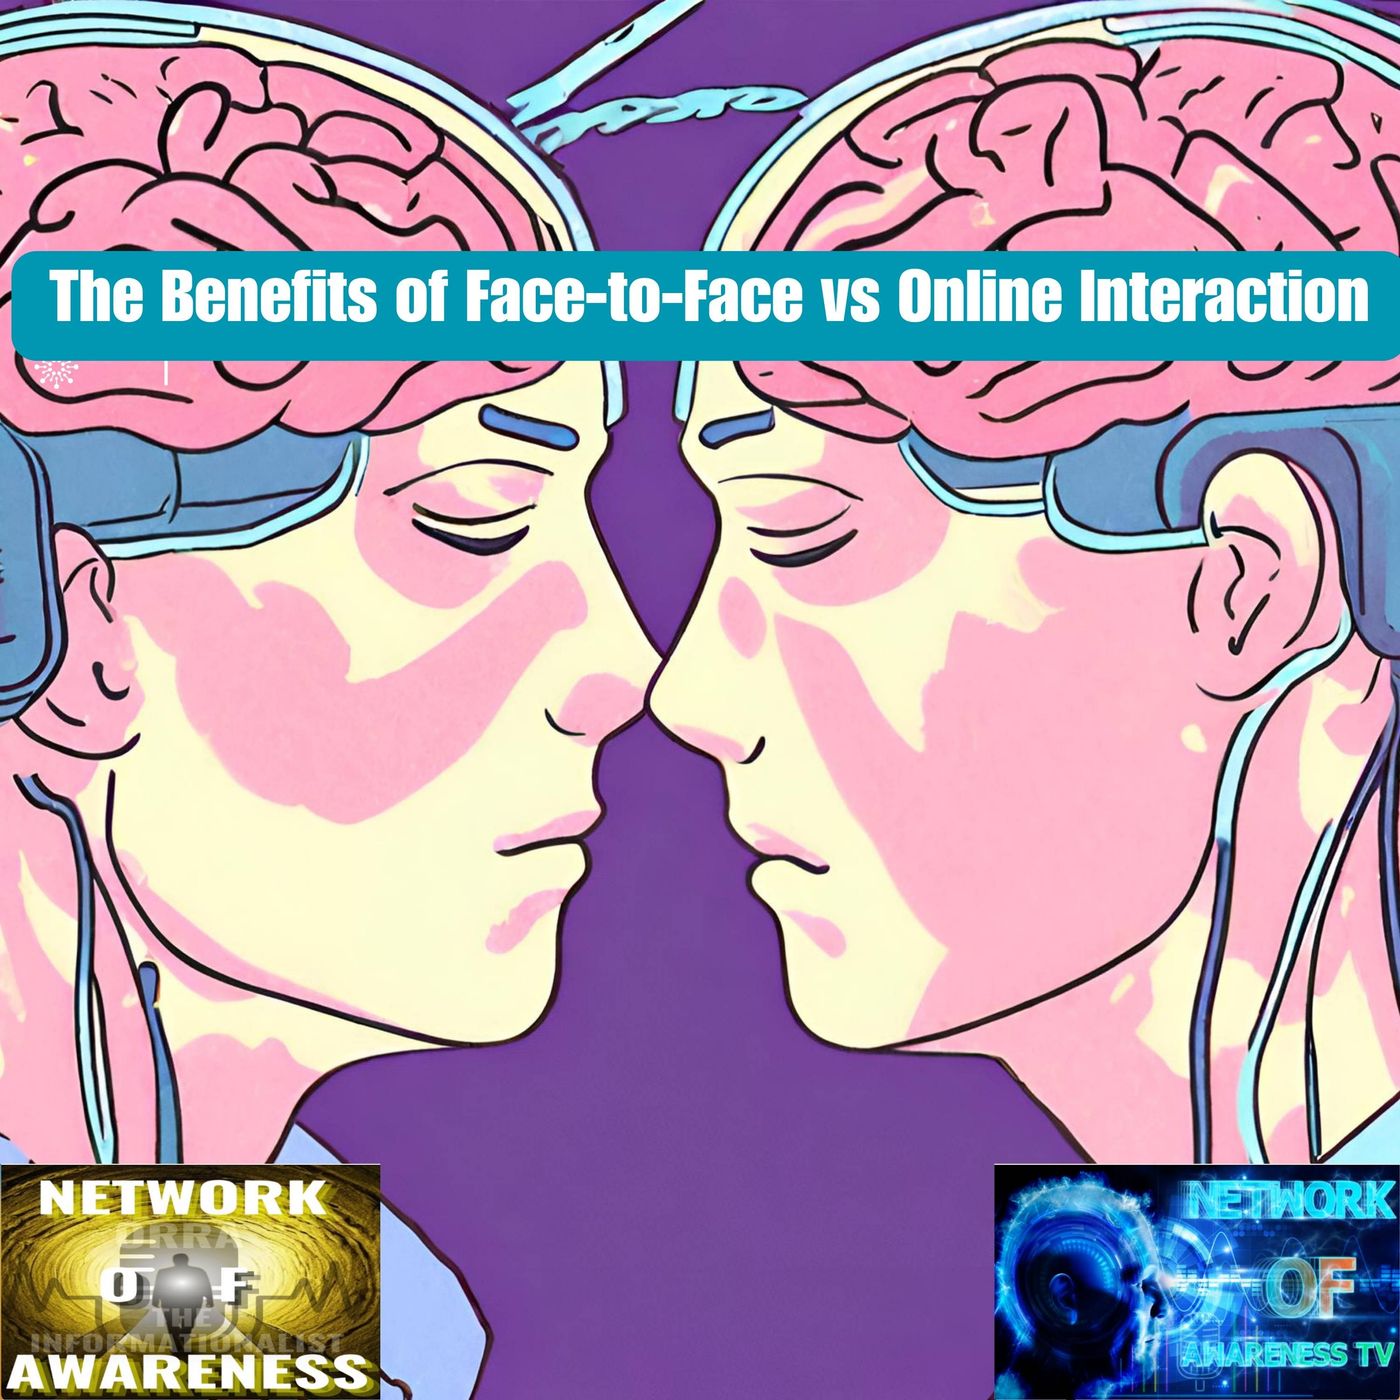 “The Benefits of Face-to-Face vs Online Interaction”